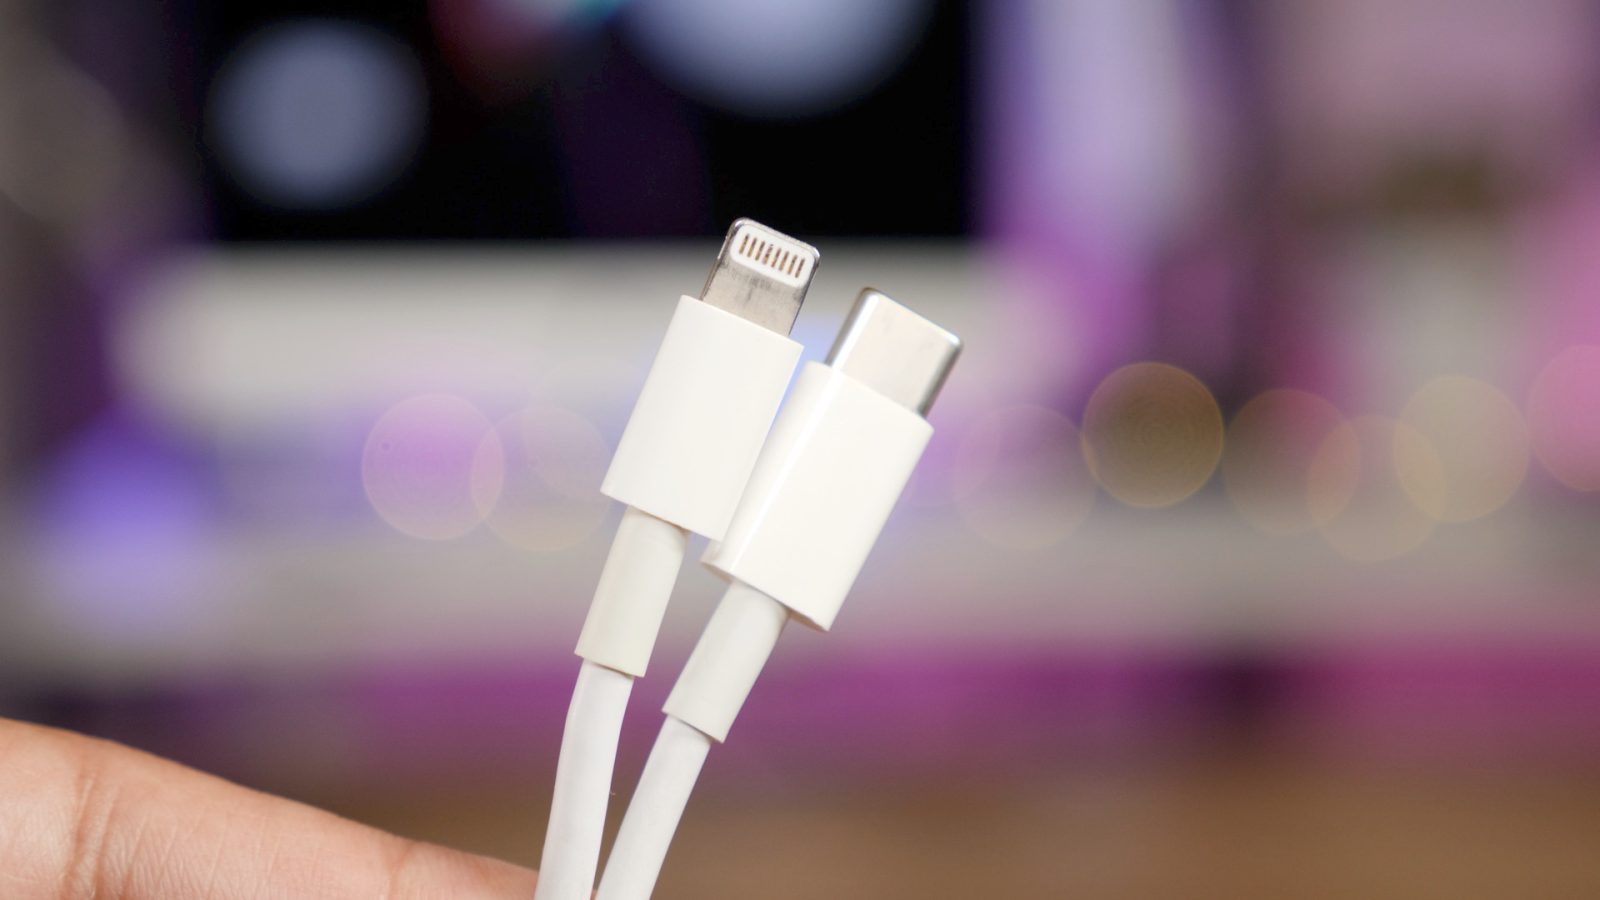 Apple reduces USB-C to Lightning Cable price amid rumors 2018